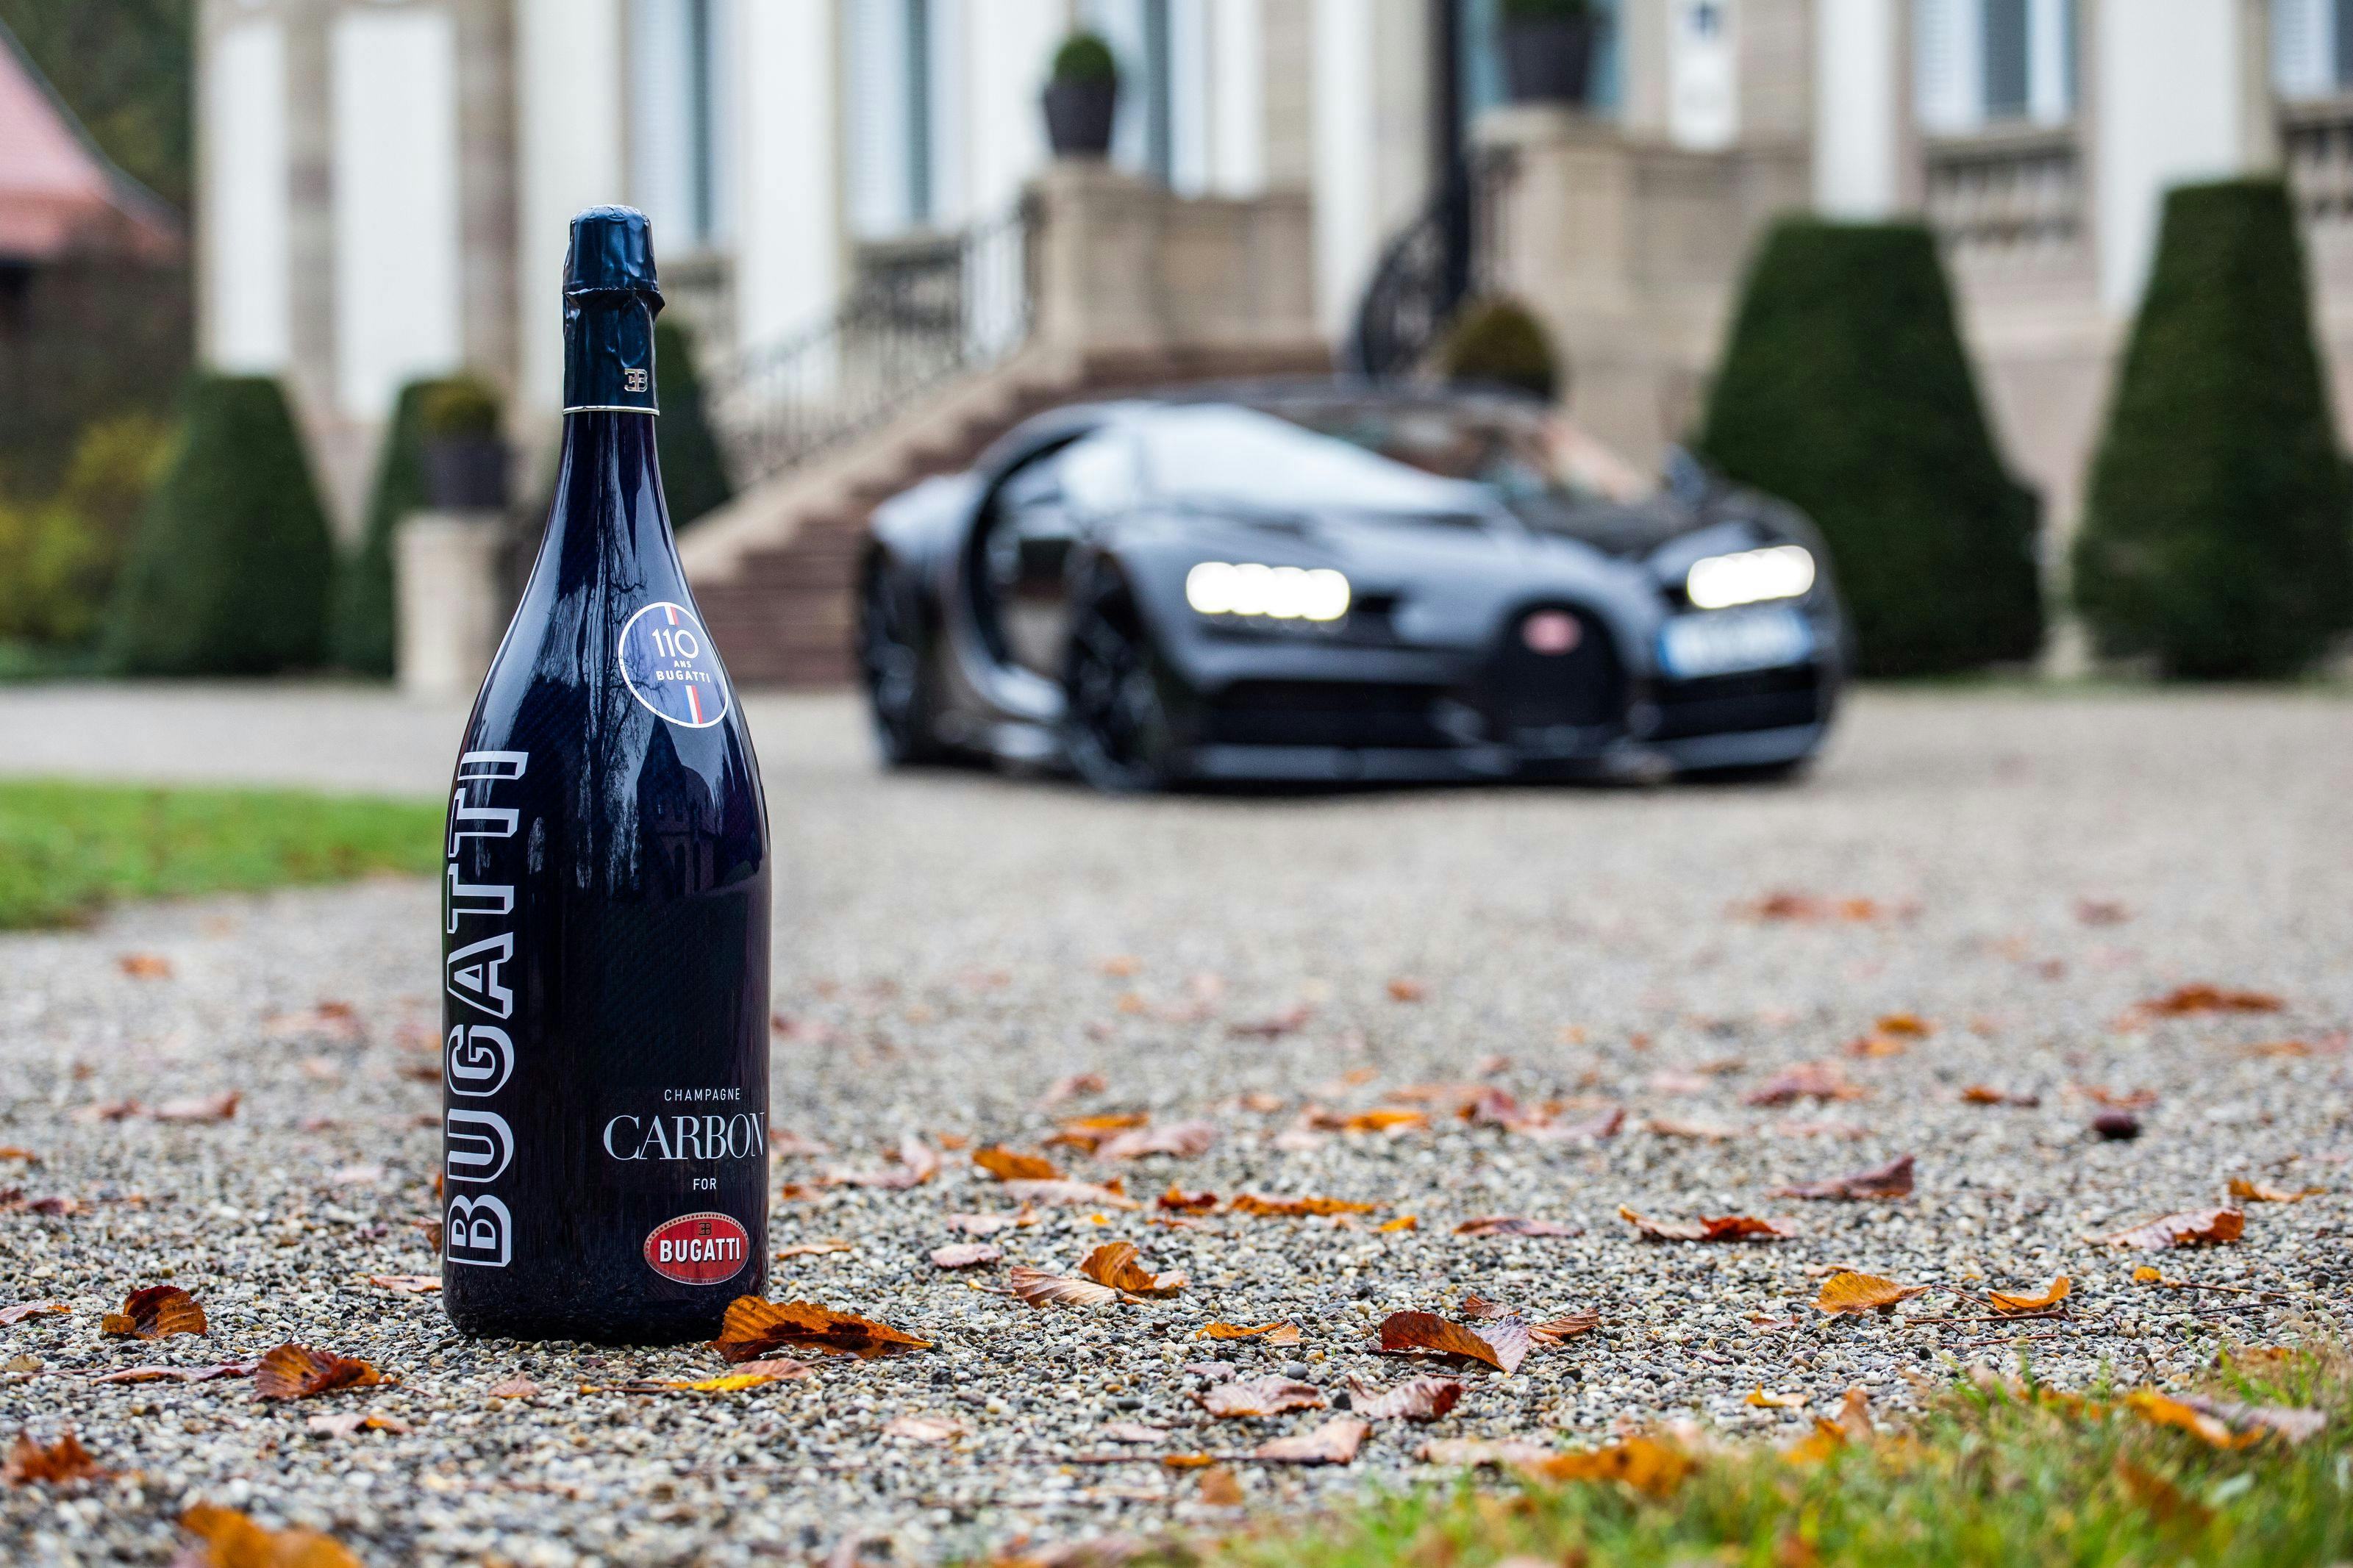 Bugatti and Champagne Carbon toast to their new partnership